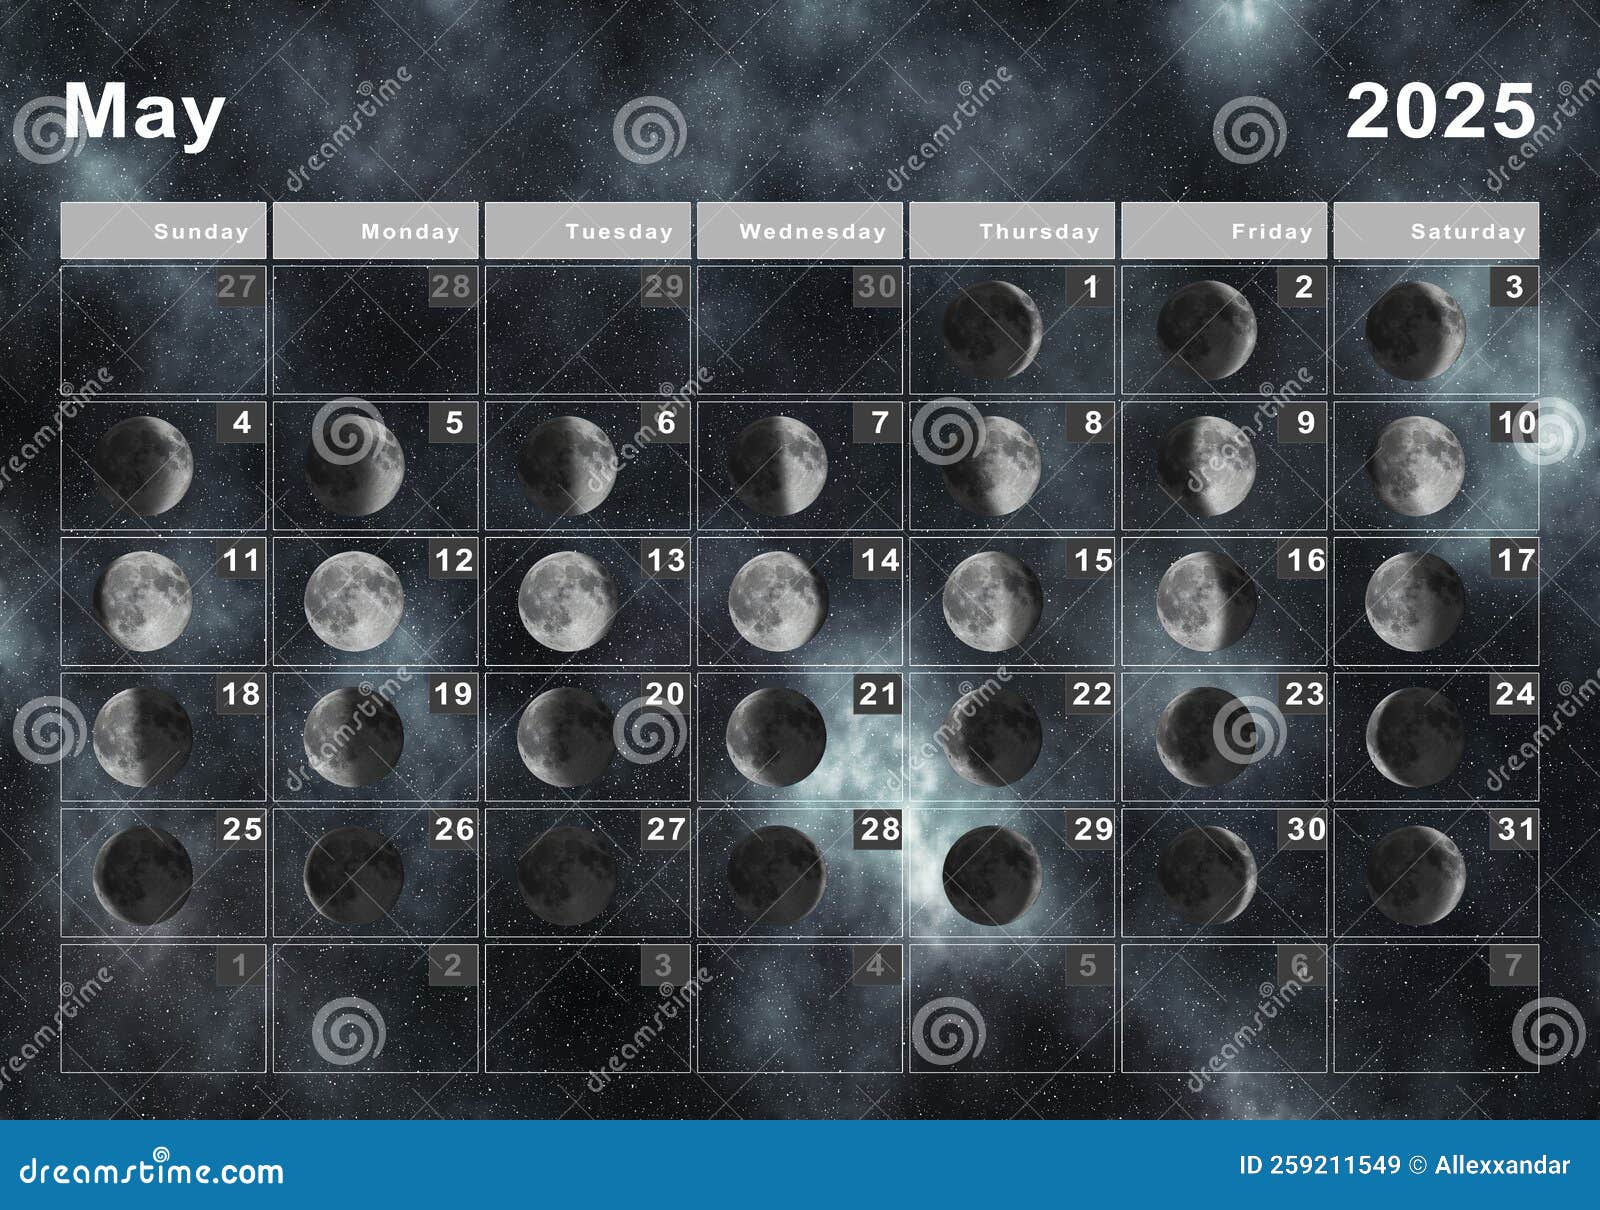 may-2025-lunar-calendar-moon-cycles-stock-illustration-illustration-of-monthly-galaxy-259211549